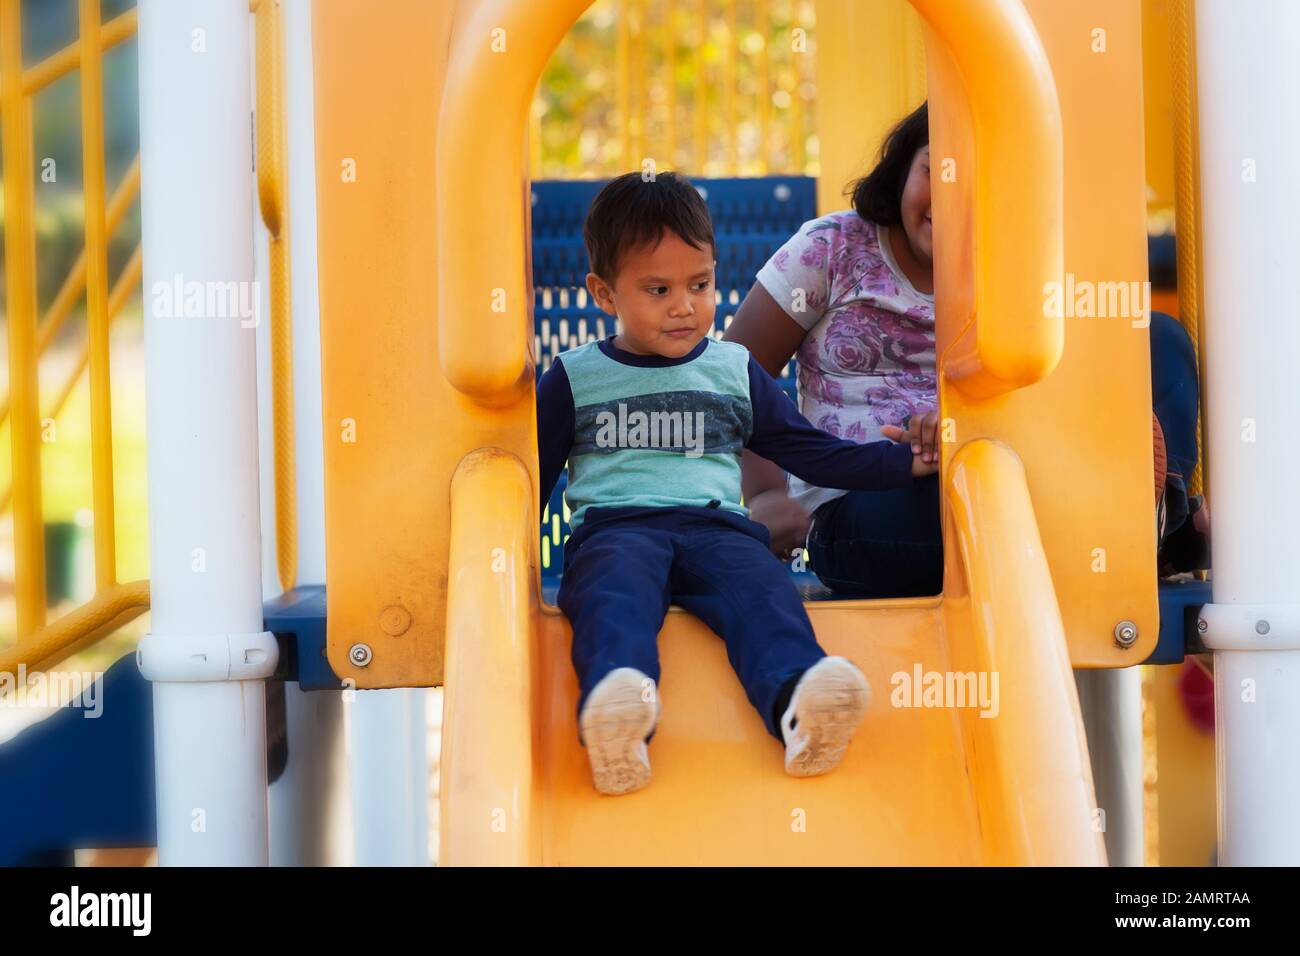 A little boy holding on to his big sisters hand before letting go on a kids playground slide. Stock Photo